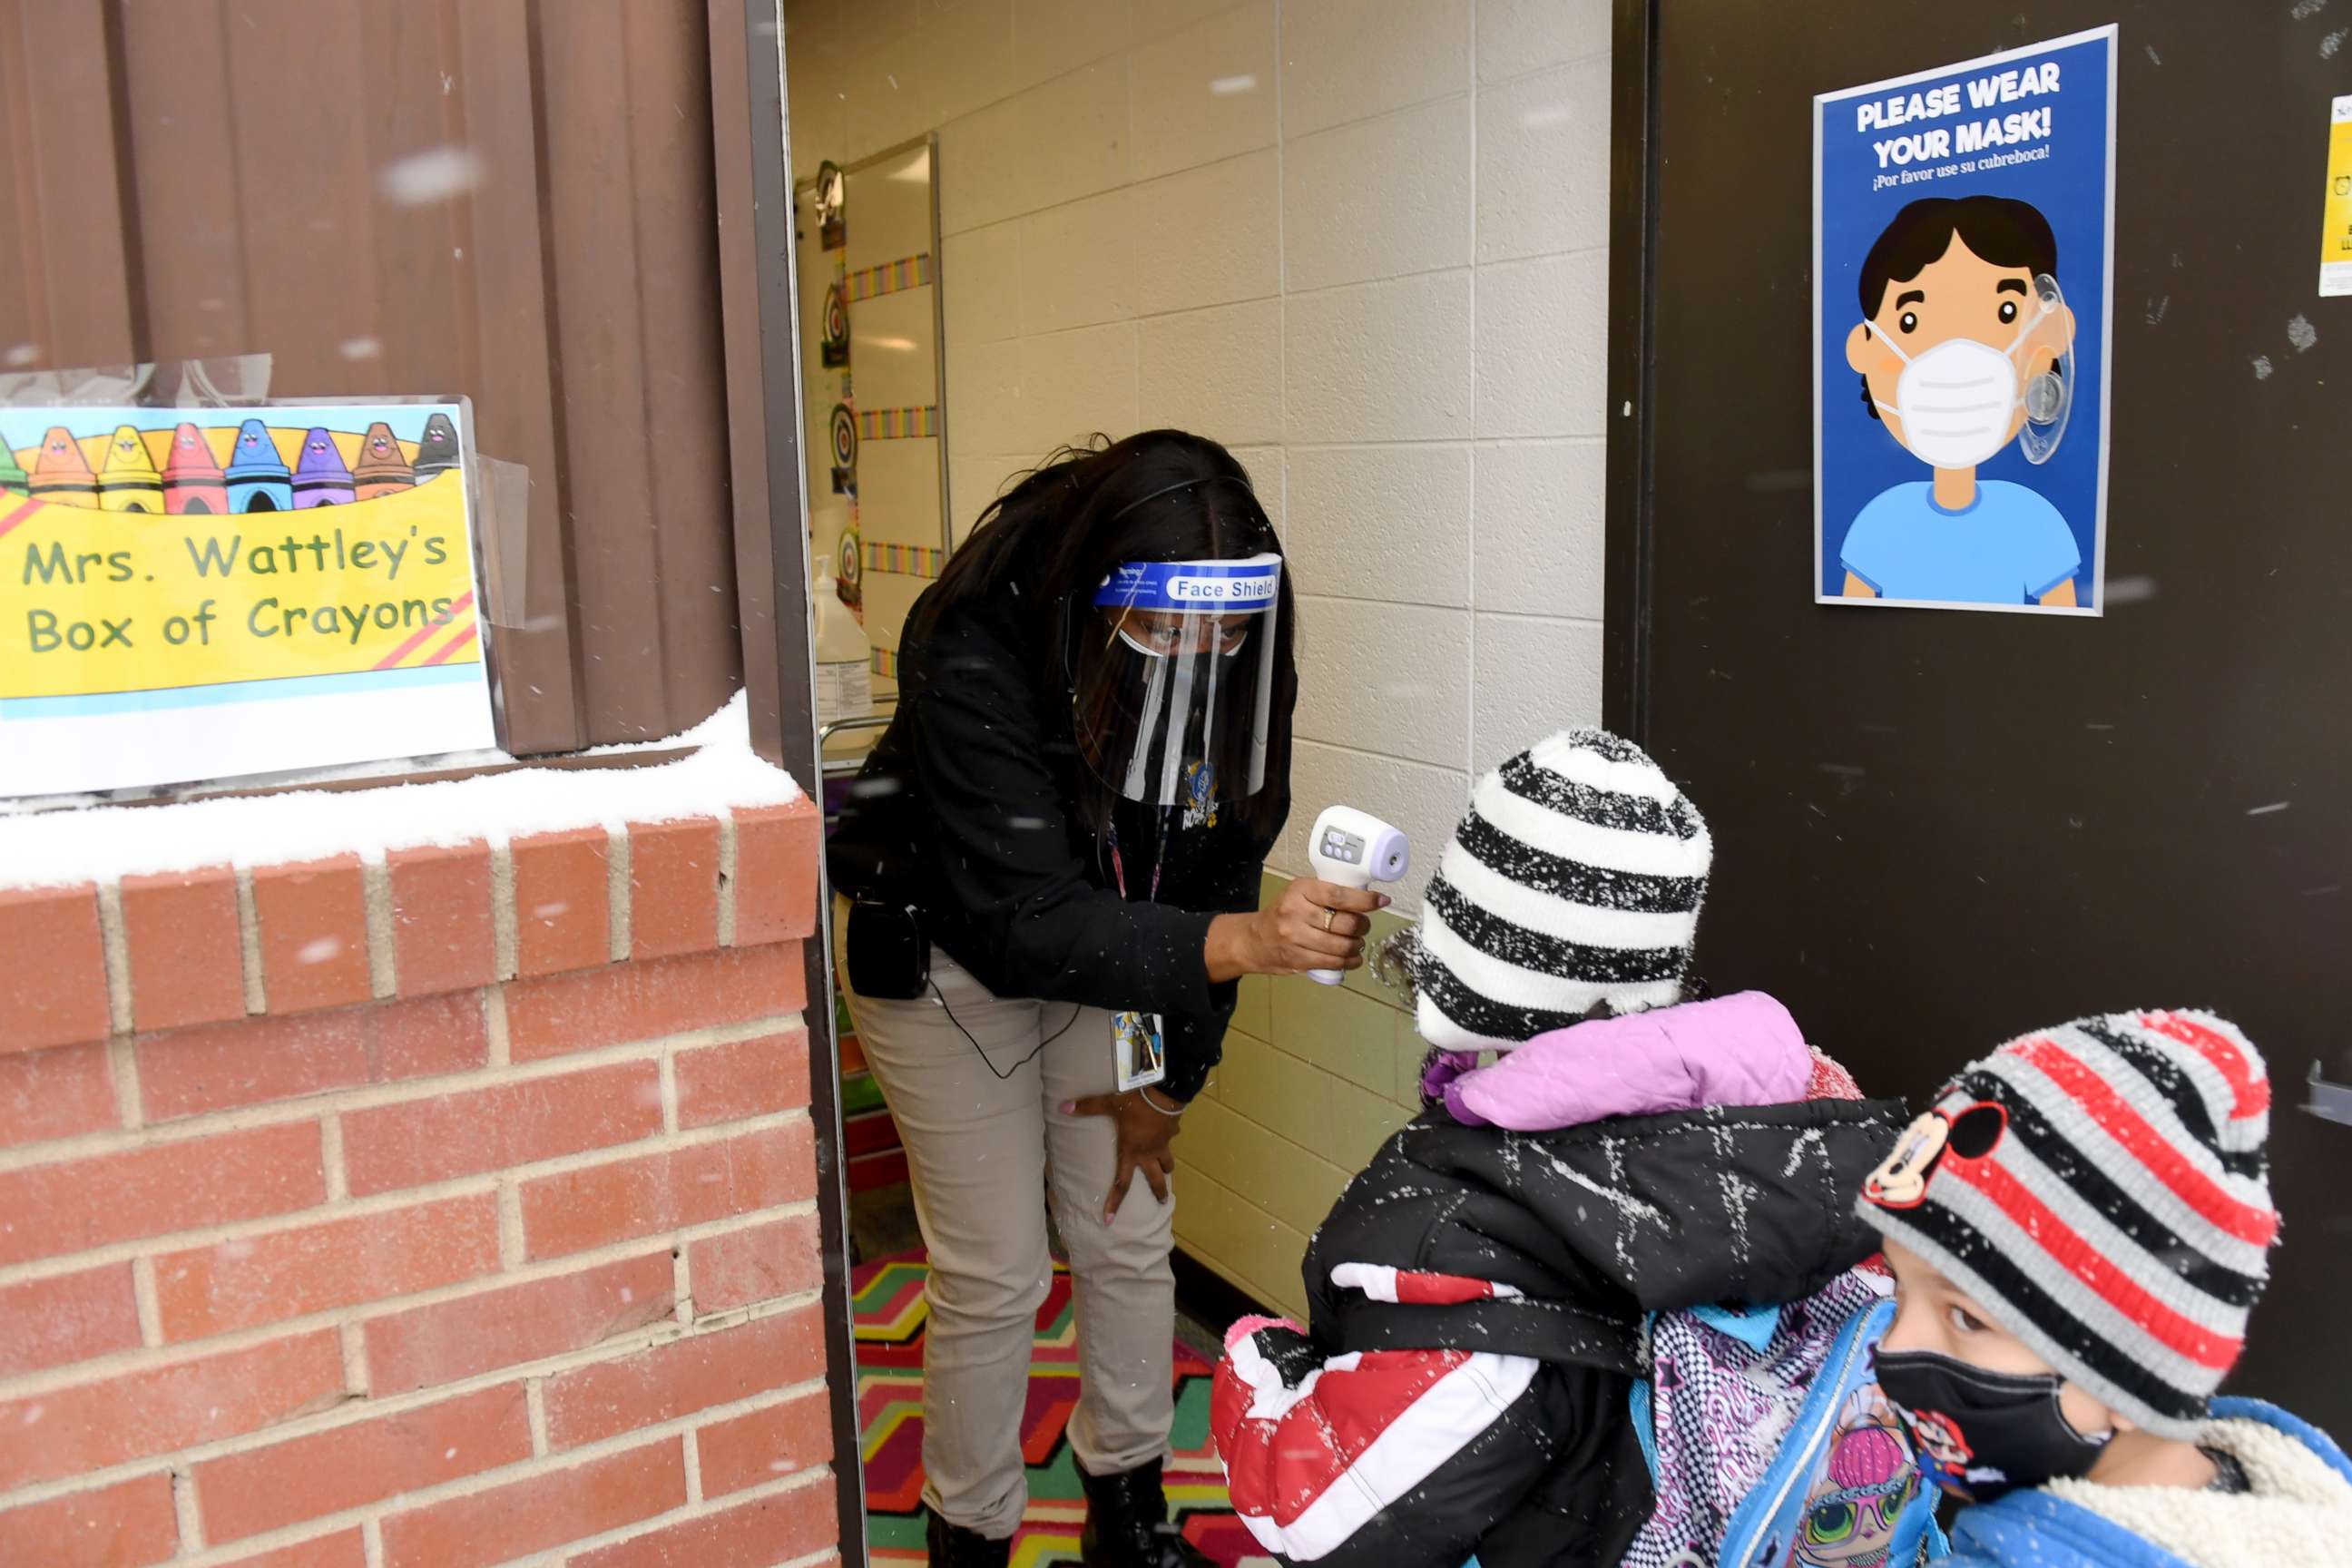 PHOTO: Teacher Raven Wattley checks body temperature of students by the entrance of the class room at Rose Hill Elementary school in Commerce City, Colorado, Jan. 26, 2021.